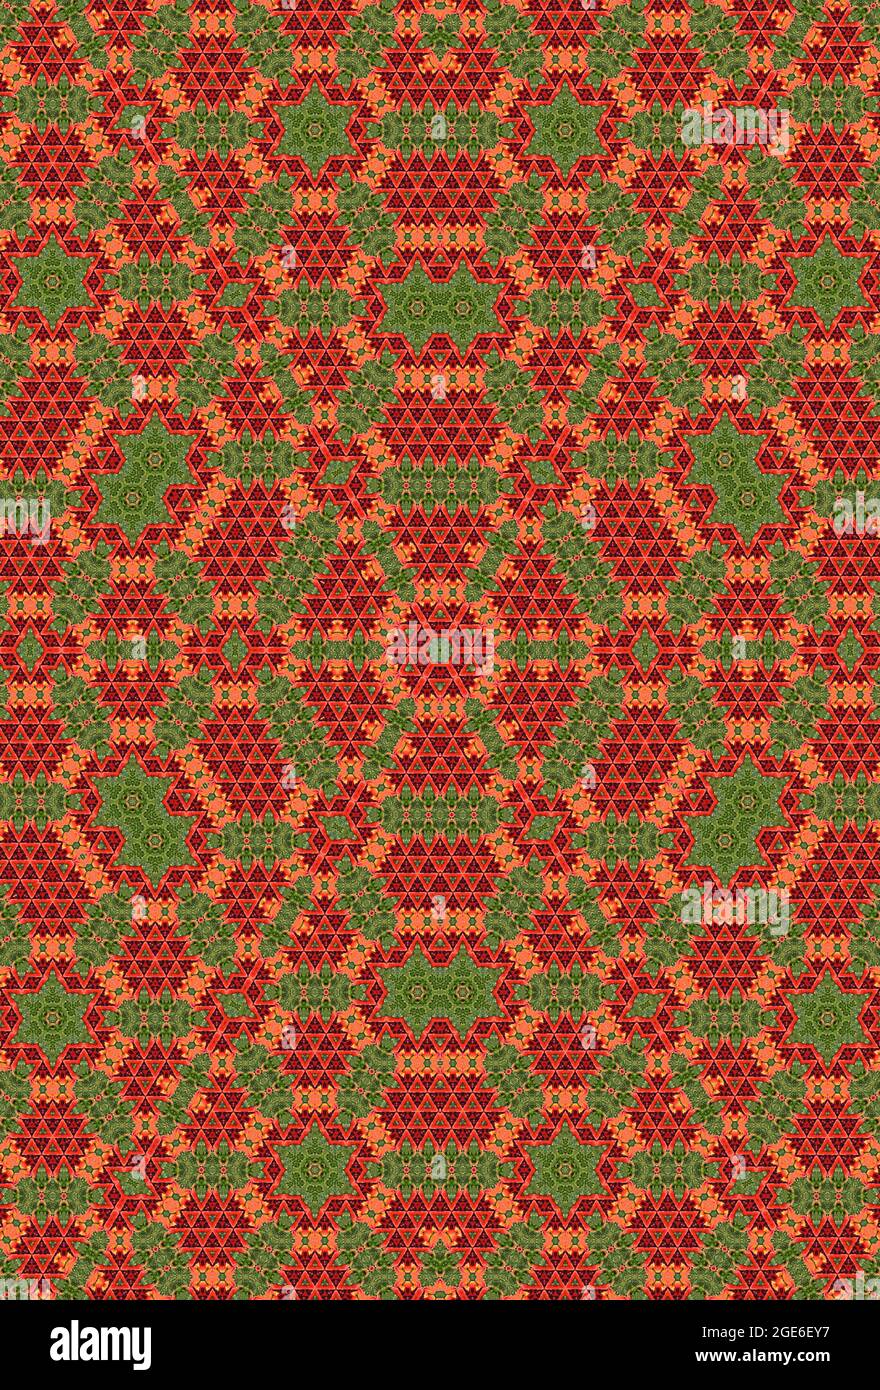 Christmas patterns and digital designs. Christmas kaleidoscope. Warm autumnal  damask designs and patterns. Victorian textile prints. Stock Photo